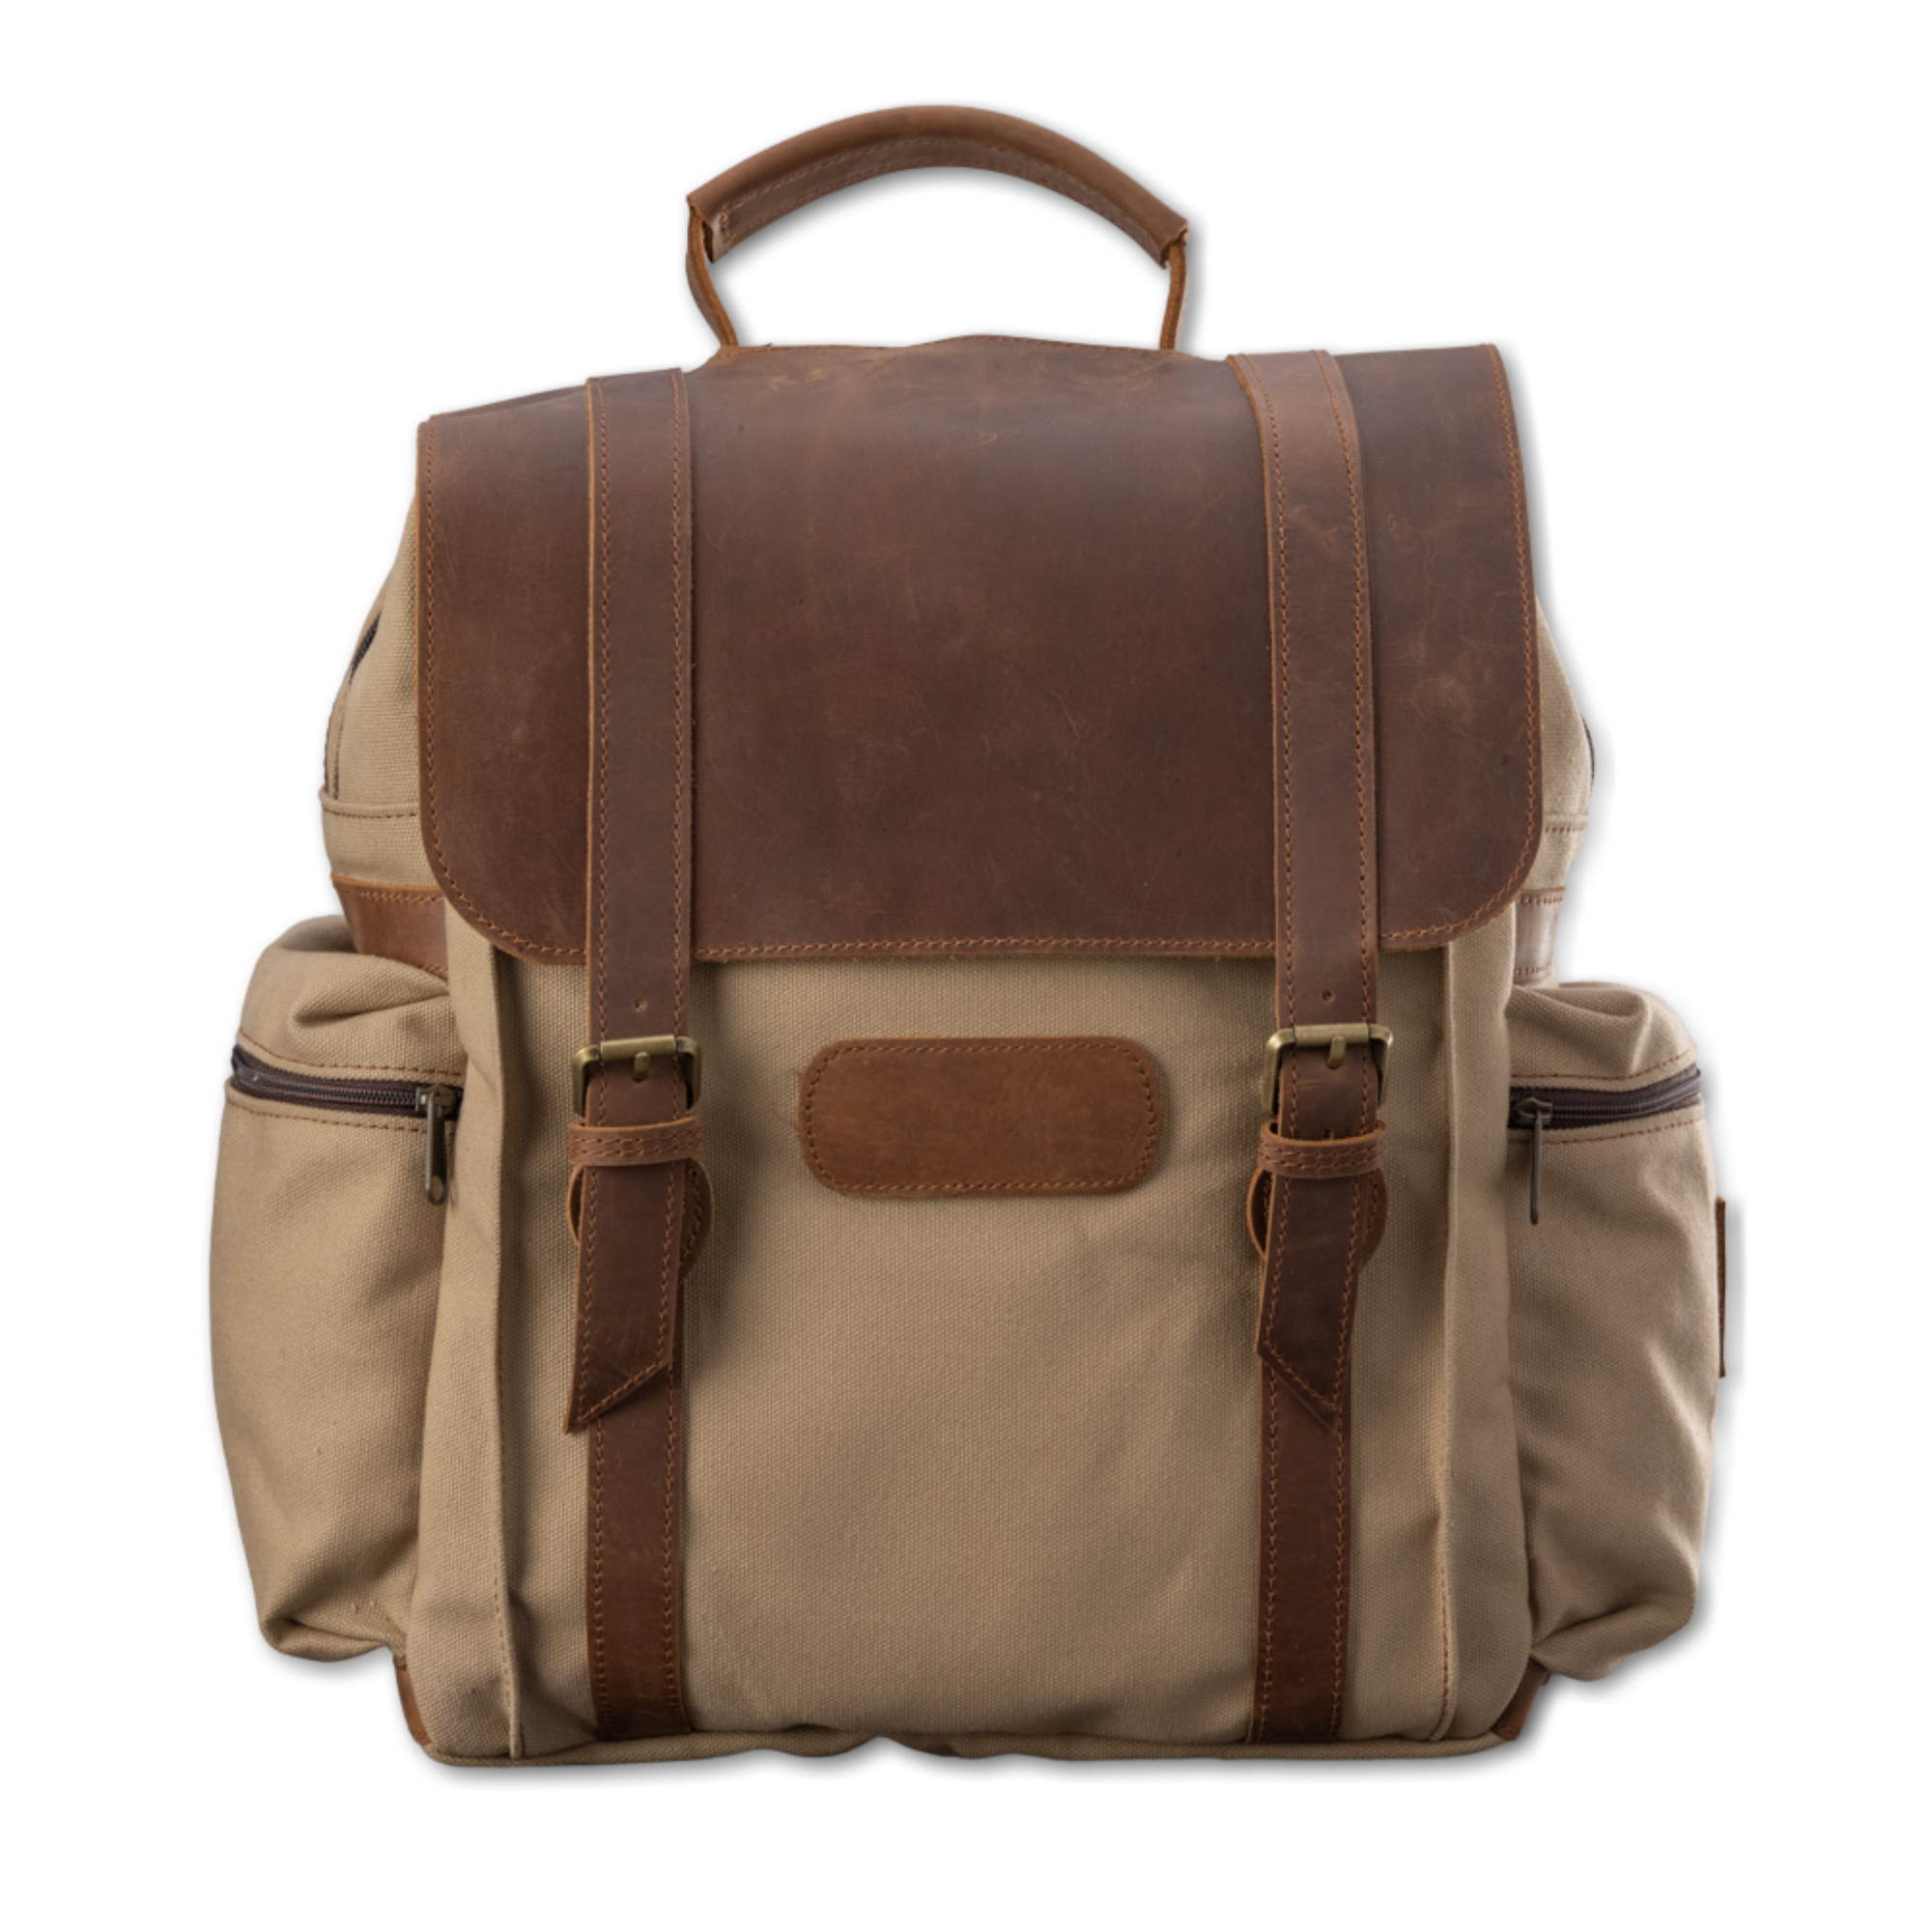 Quality made in America cotton canvas and oiled leather computer backpack to personalize with initials or monogram